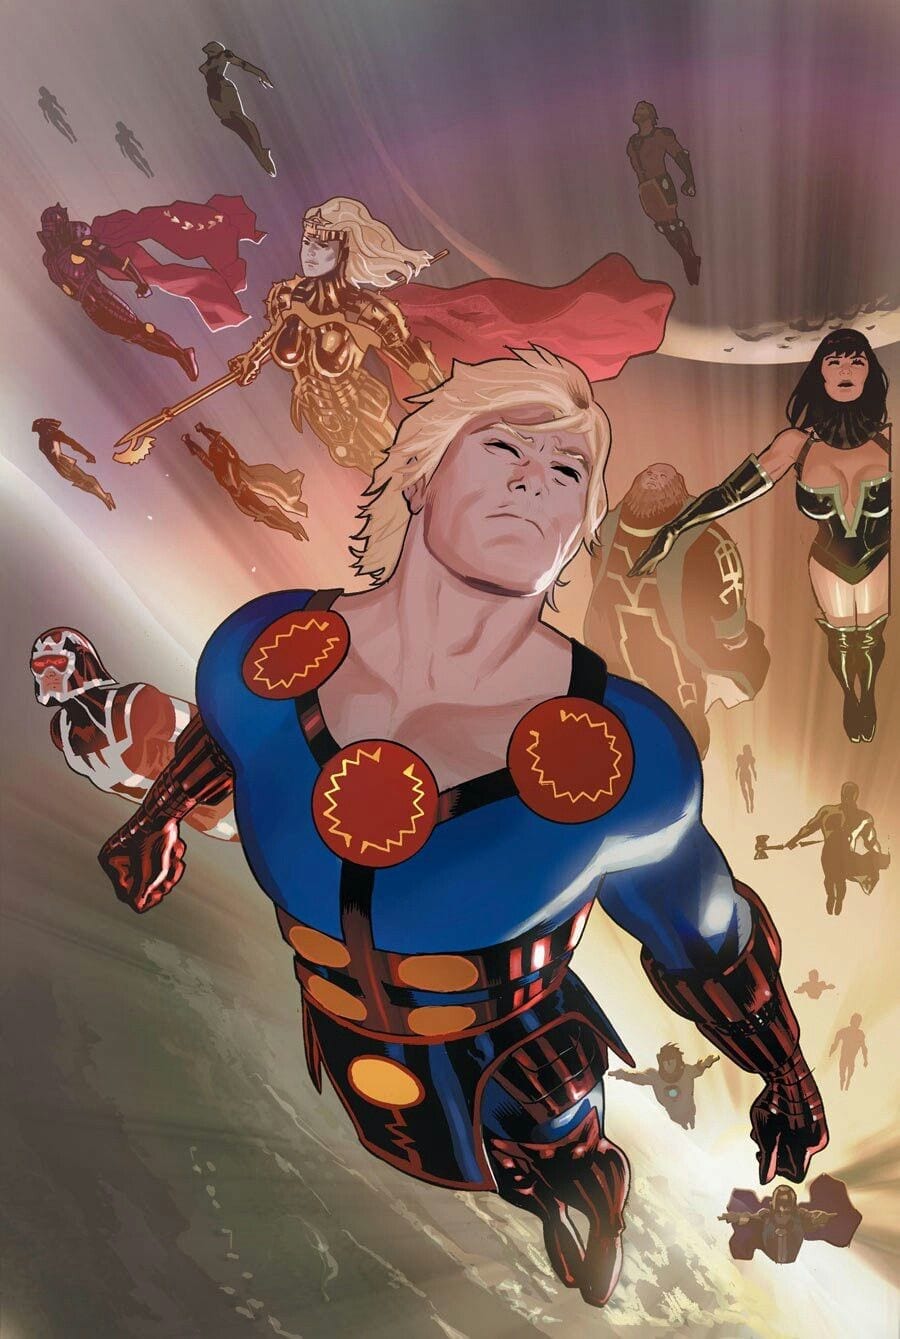 Marvel Studios' Looking For A Gay Male Actor To Lead Their New “Eternals” Film • Instinct Magazine